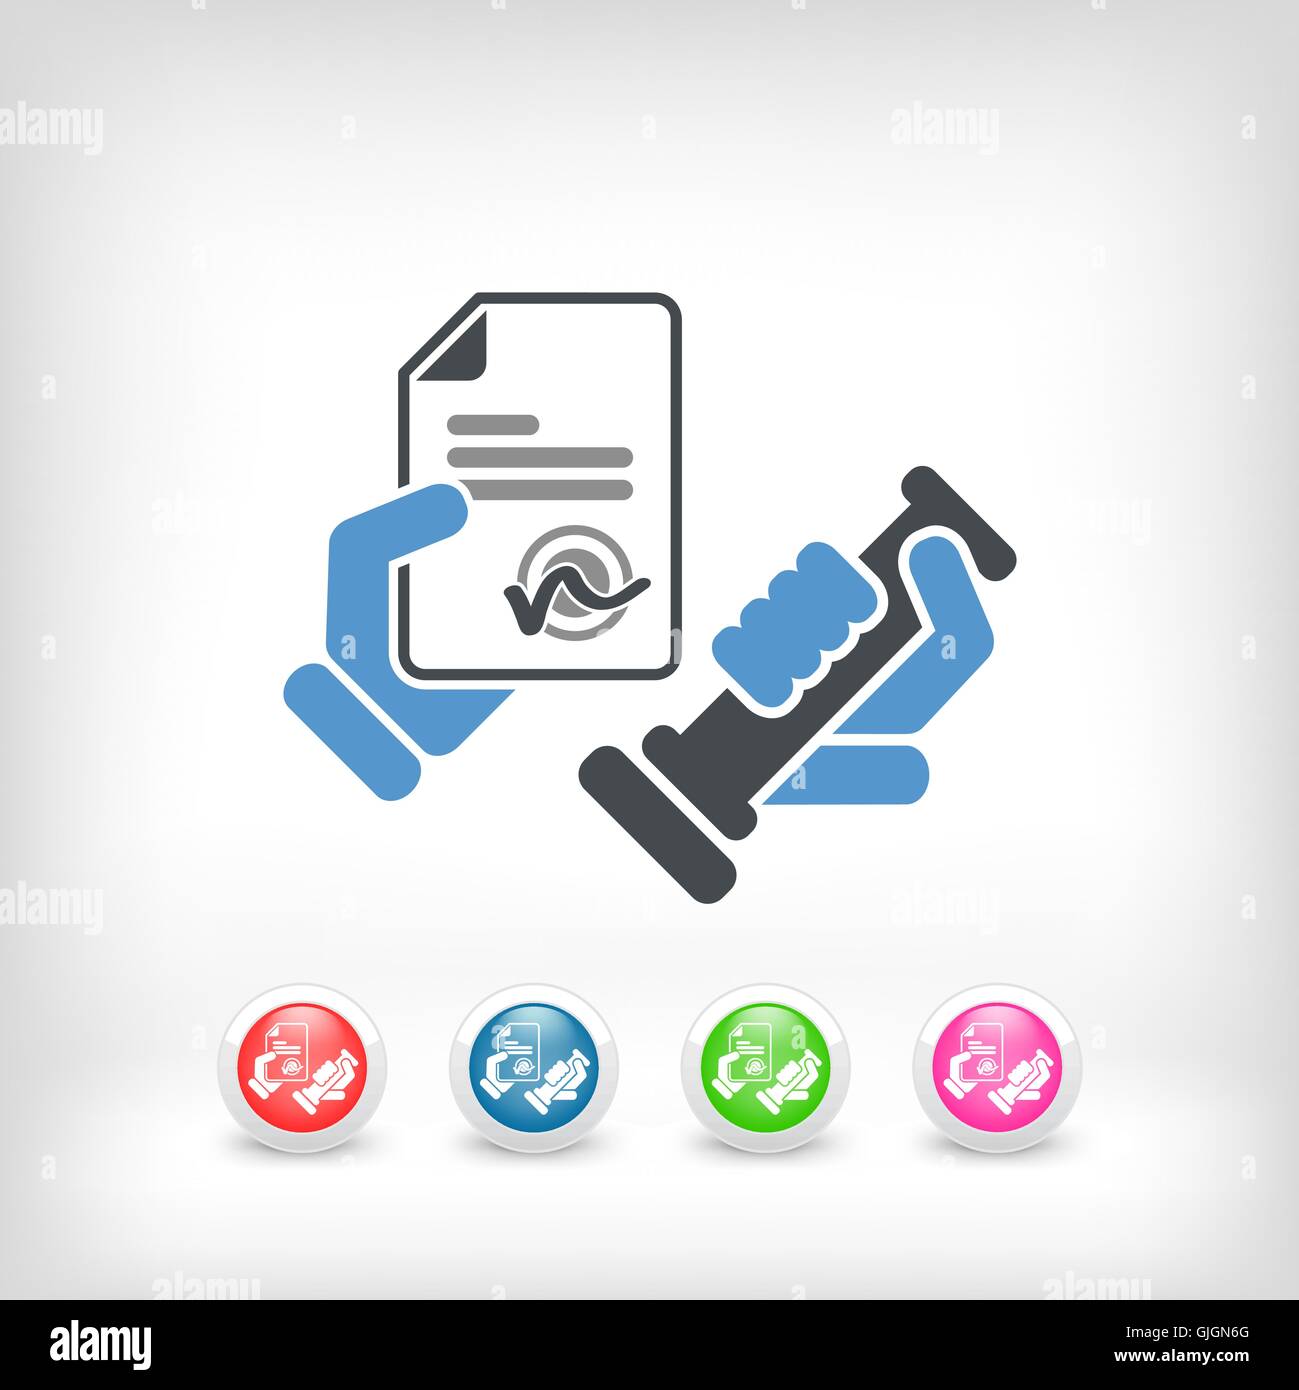 Stamp icon Stock Vector